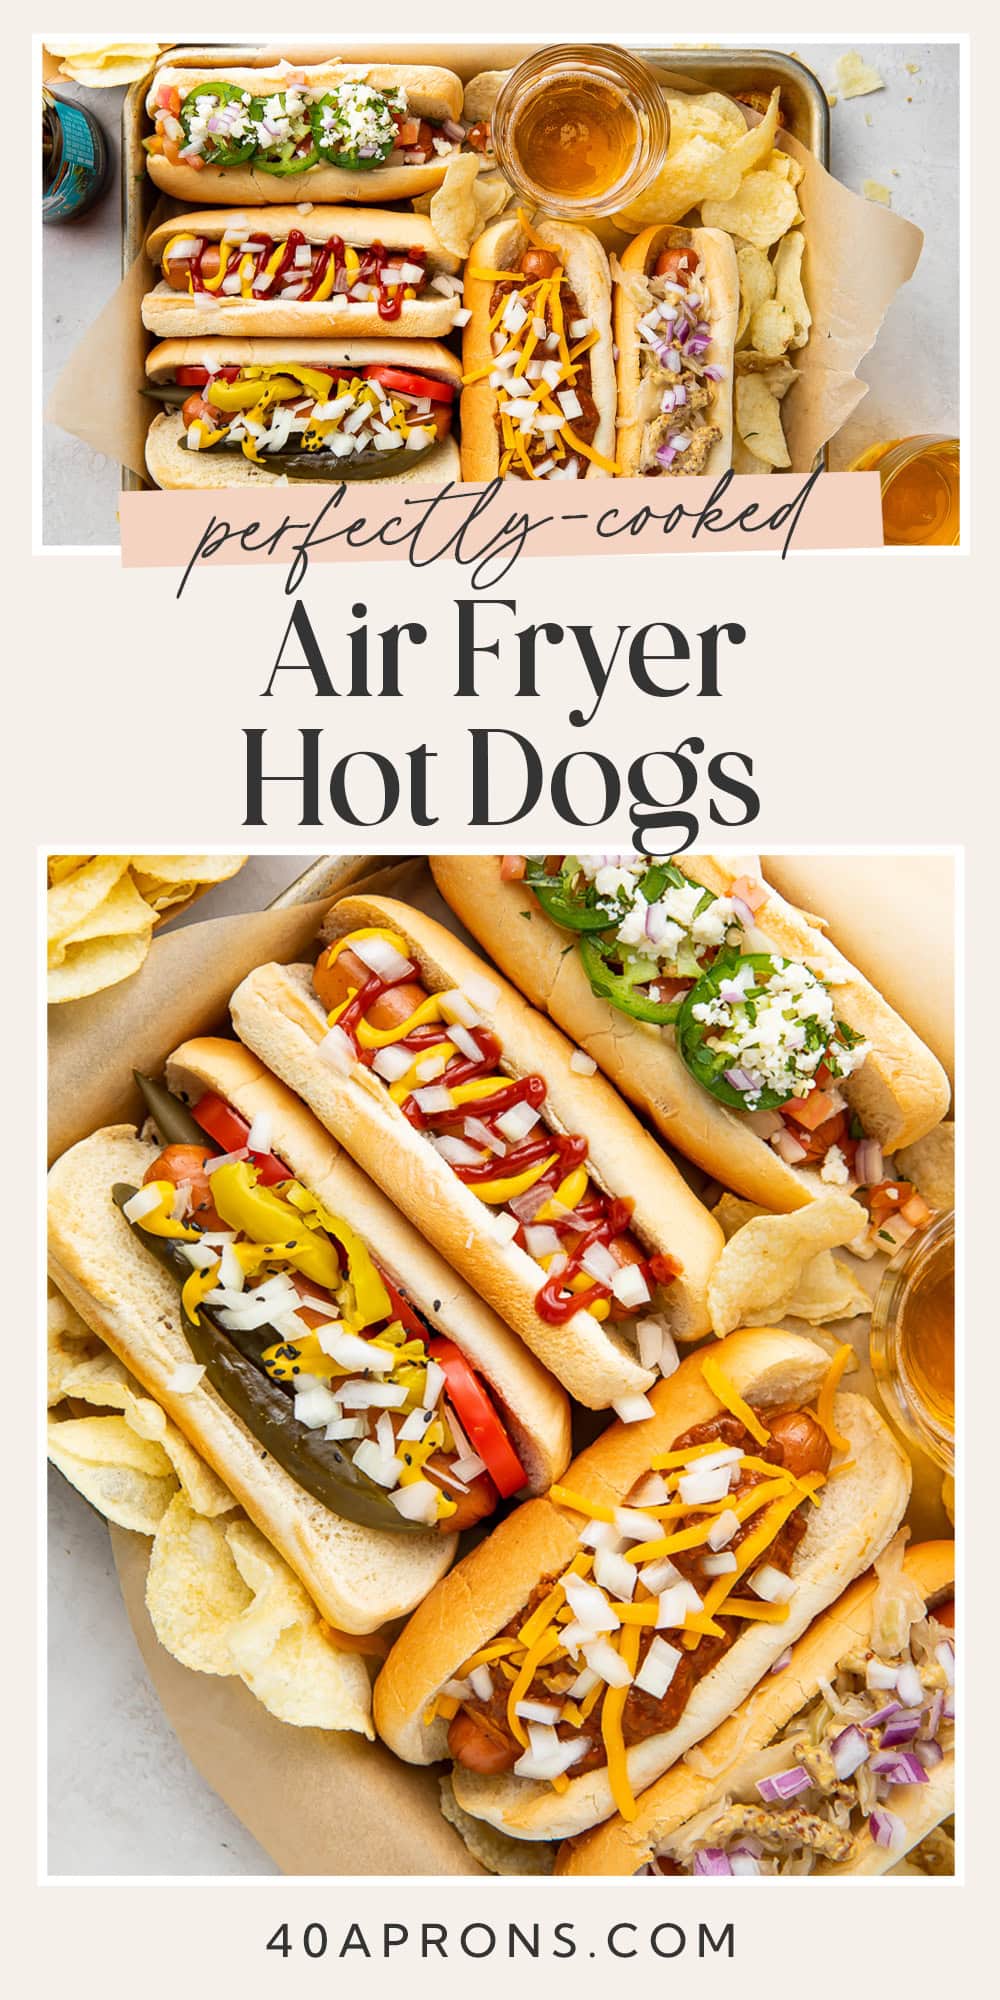 Pin graphic for air fryer hot dogs.